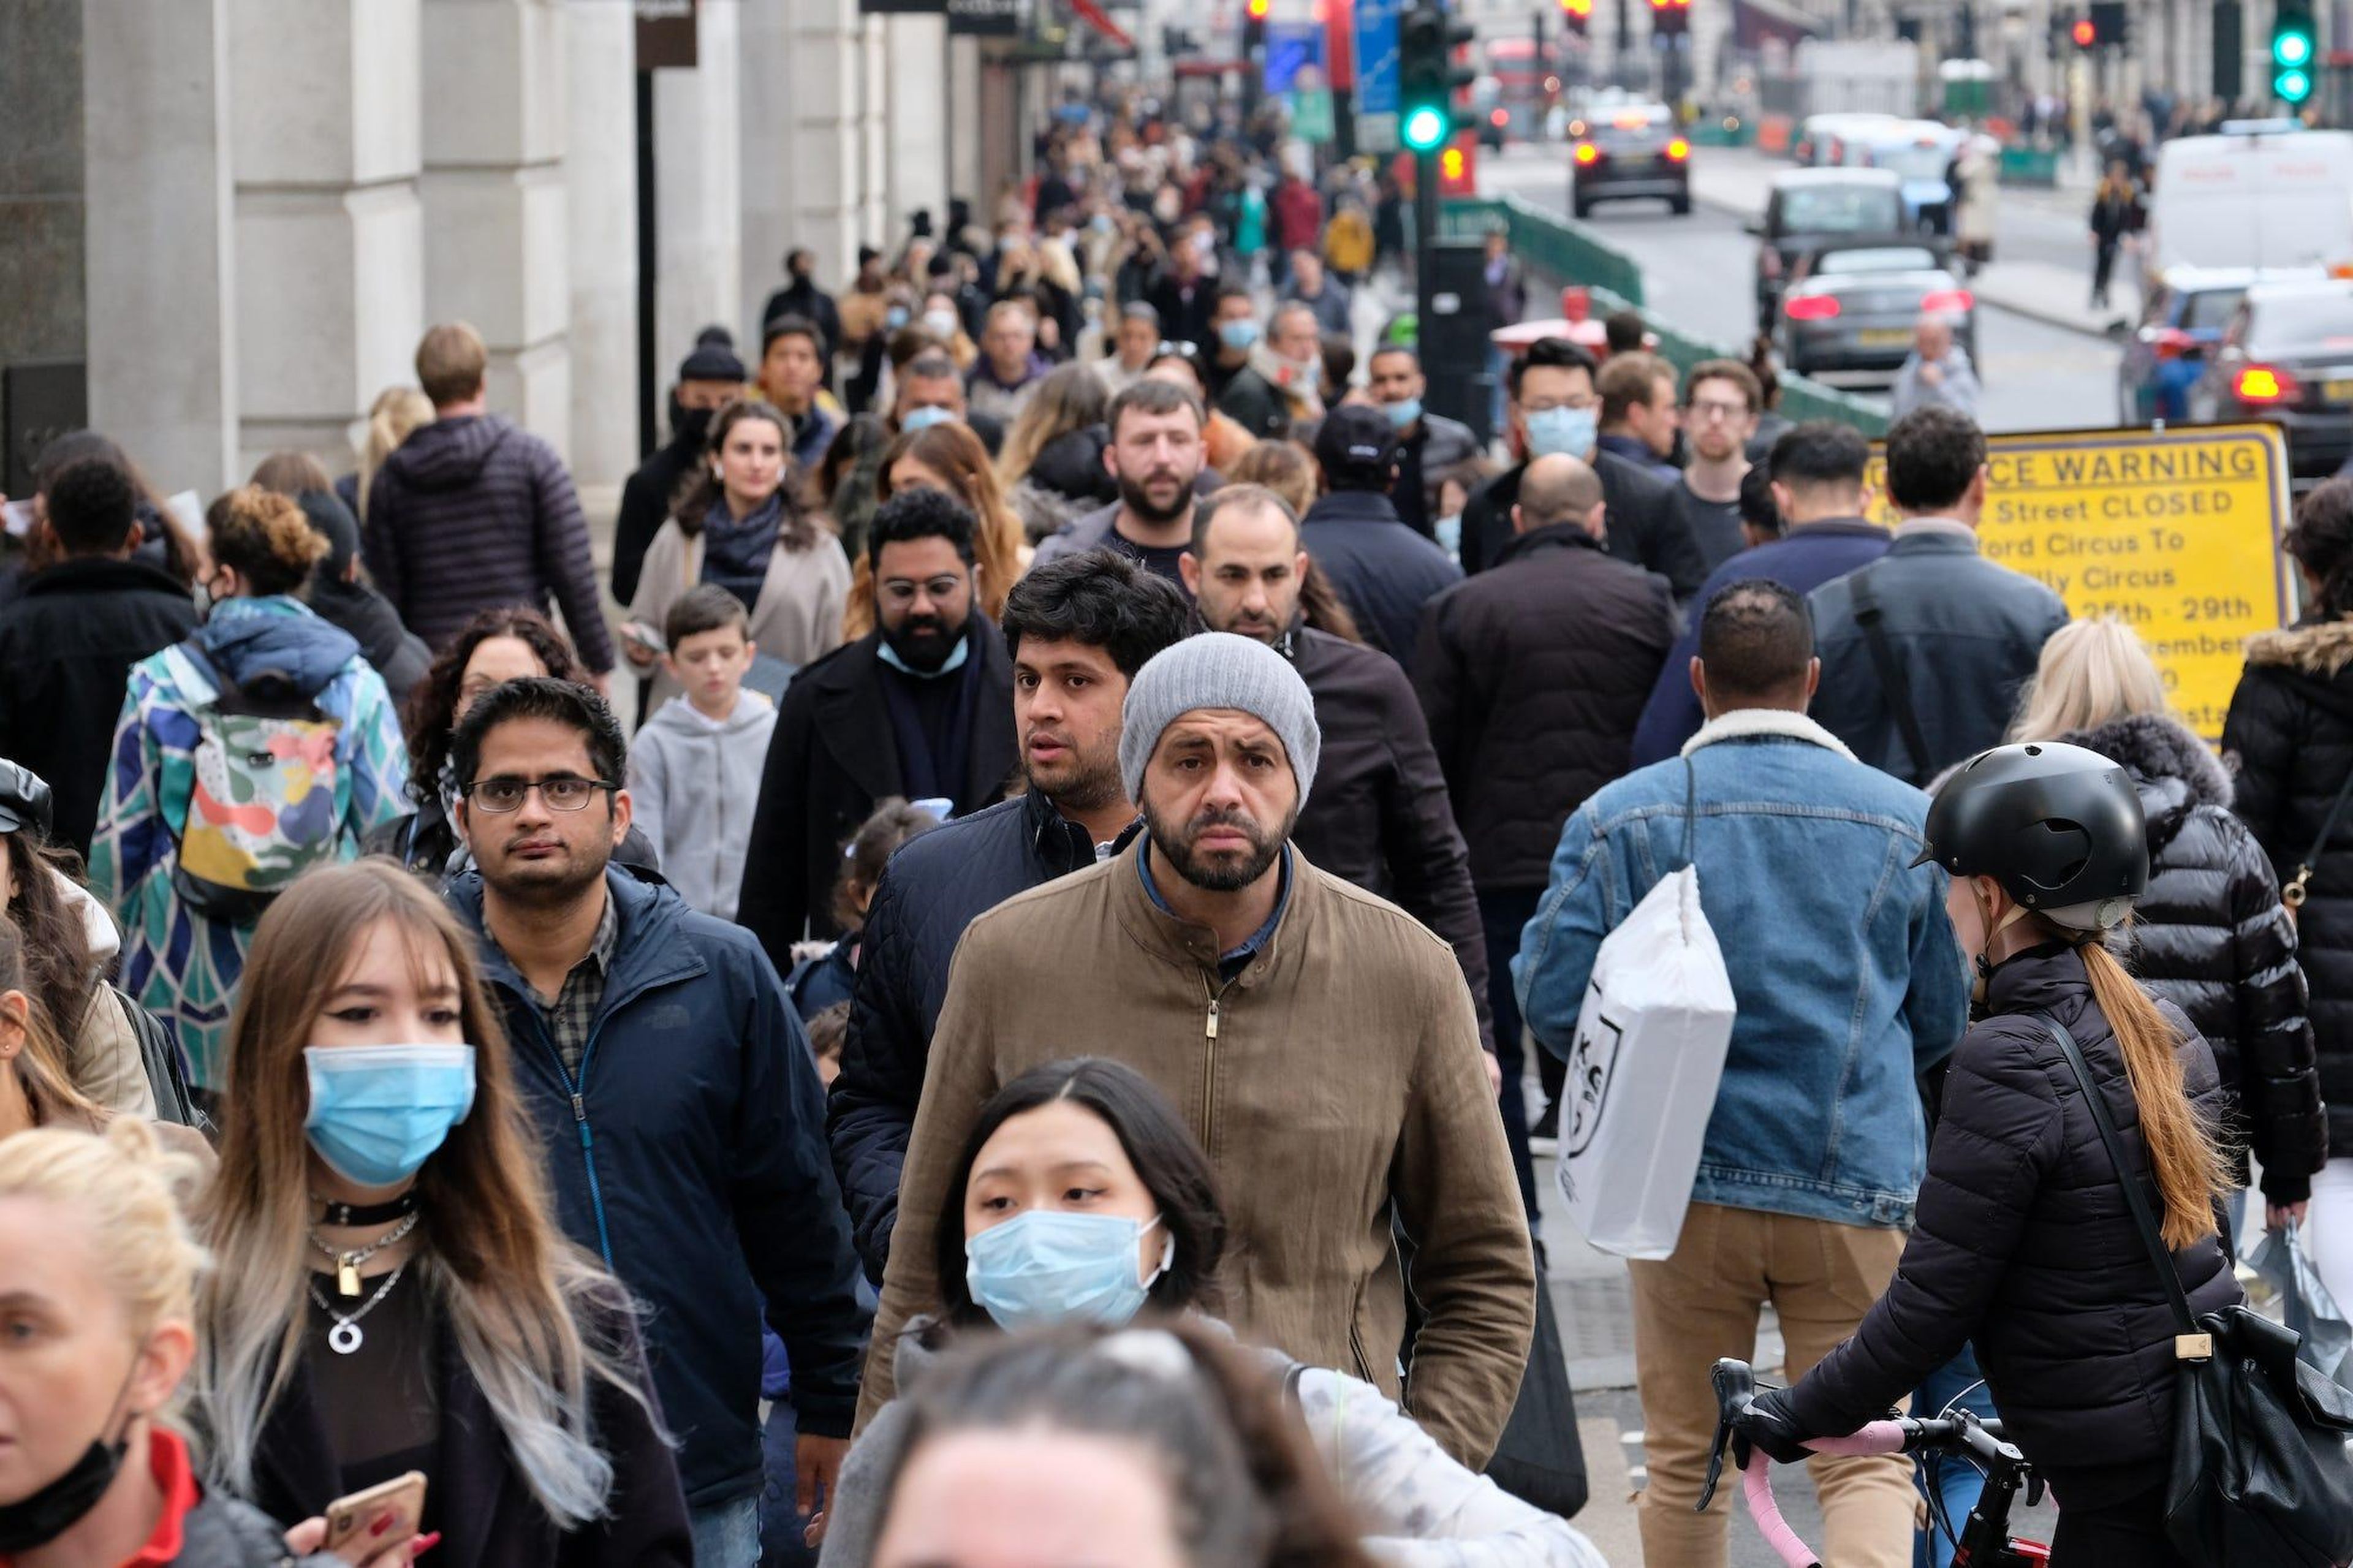 A crowded London street as seen on October 18, 2020.